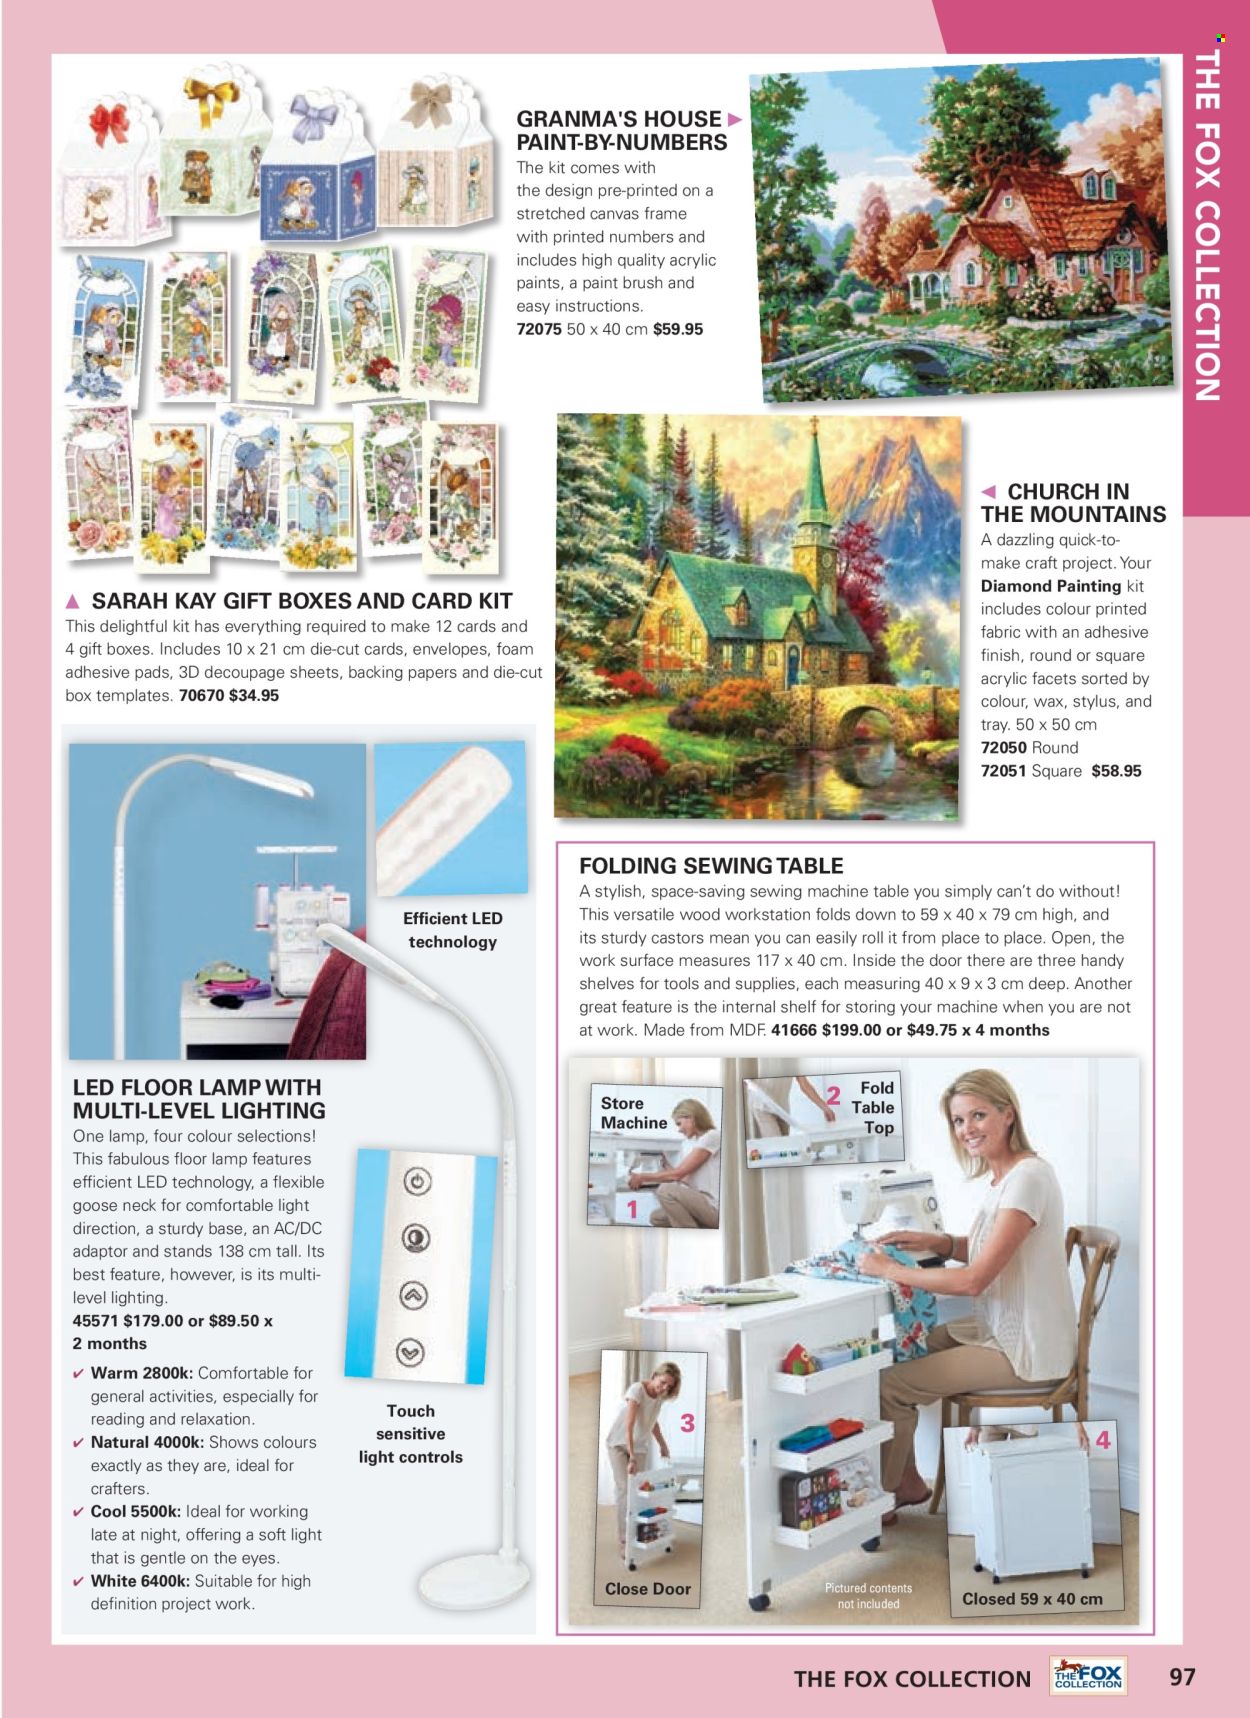 thumbnail - Innovations Catalogue - Sales products - adaptor, paint brush, gift box, envelope, painting kit, canvas, drawing tools, acrylic paint, sewing machine, lamp, lighting, floor lamp. Page 97.